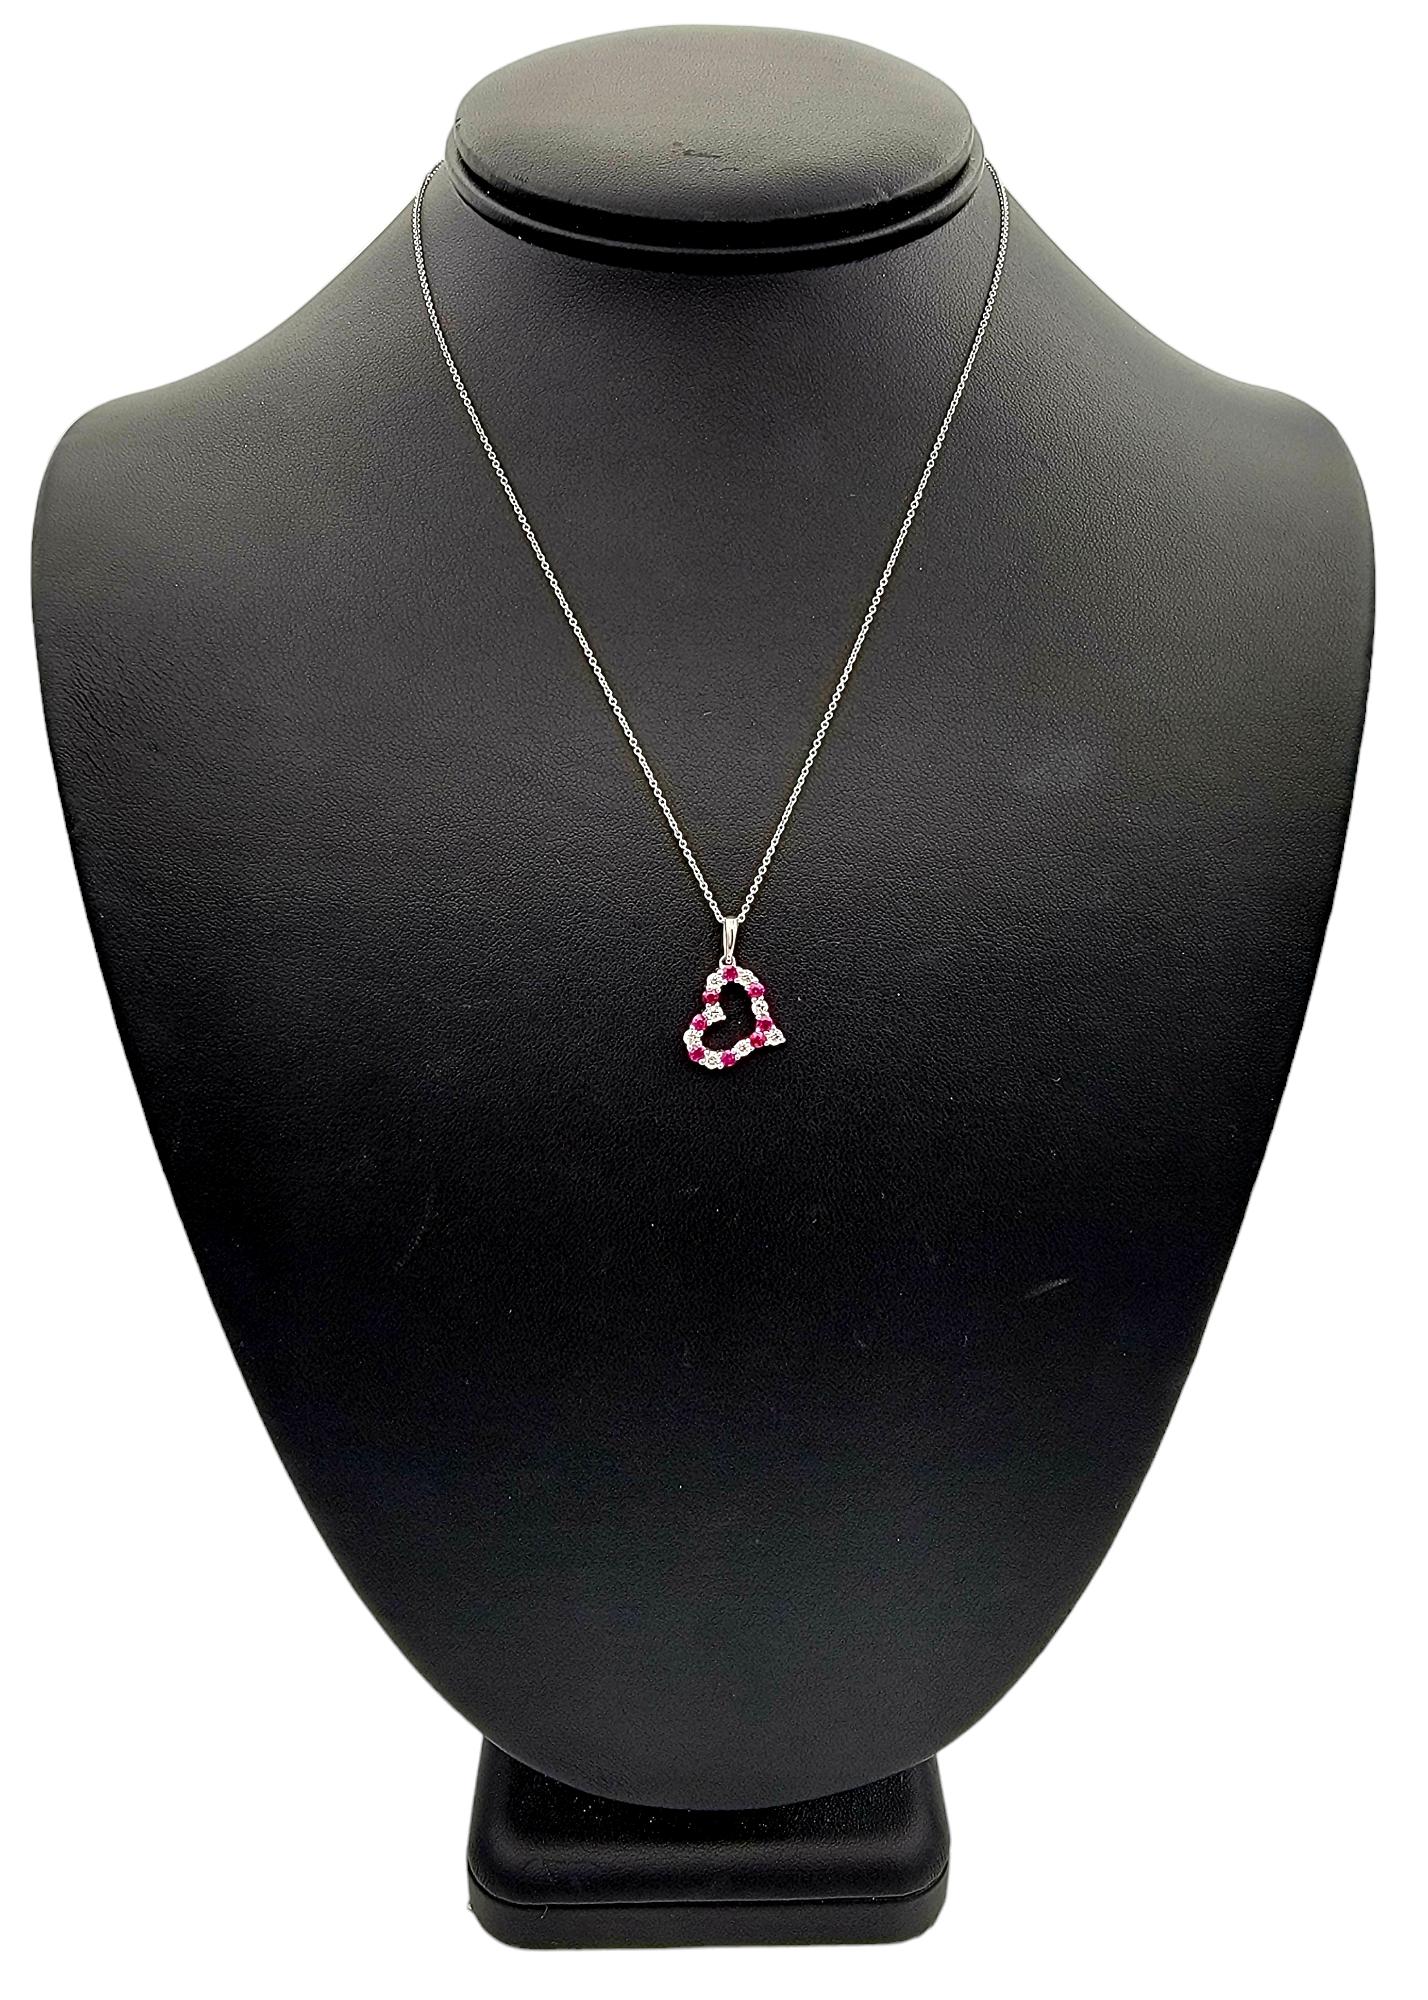 Round Diamond and Ruby Open Heart Pendant Necklace Set in 14 Karat White Gold For Sale 2